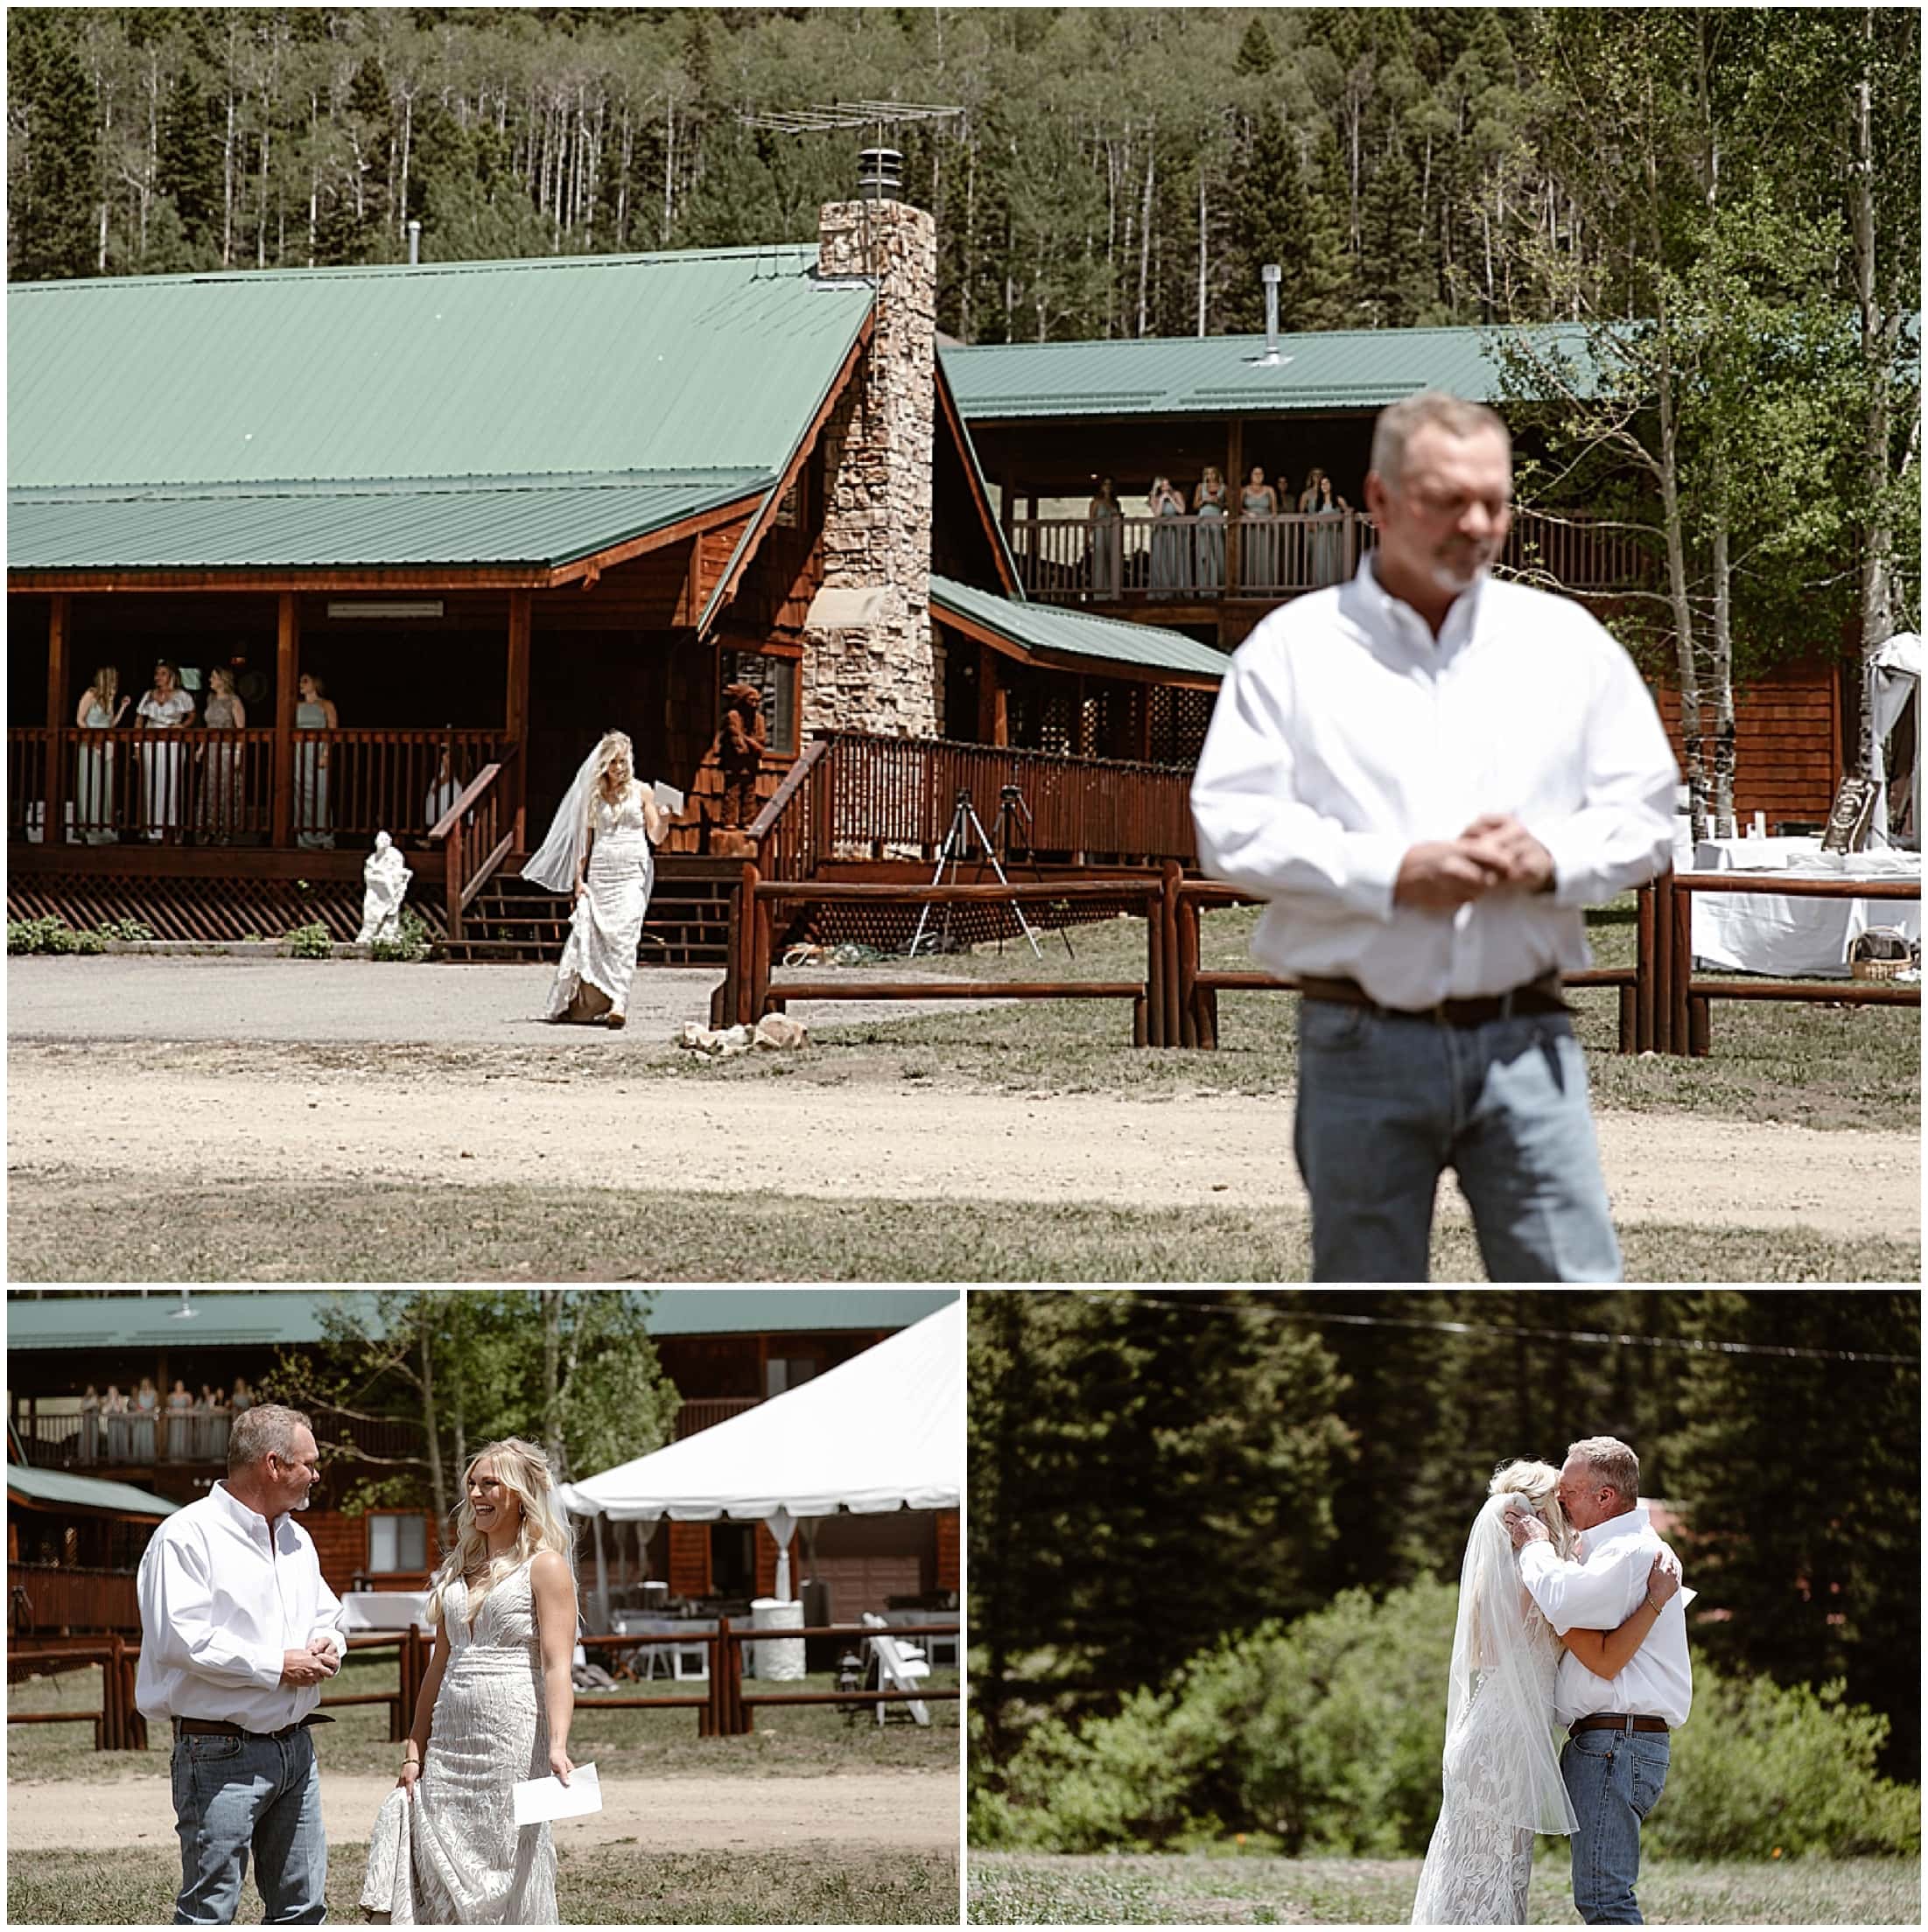 brides first look with dad in the mountains, emotional father of the bride, Aspen Lodge, Red River New Mexico, Red River New Mexico Wedding, Weddings in New Mexico, Destination mountain wedding, destination mountain elopement, elopements in new mexico, places to get married in new mexico, destination elopement photographer, mountain wedding photographer, new mexico wedding photographer, new mexico elopement photographer, brit nicole photography, cabin wedding, new mexico cabin wedding, mountain landscape for wedding, small intimate mountain wedding, small intimate river wedding, wedding photographer in new mexico, junebug weddings, the knot, wedding wire, 41 productions with lindsay gomez, dallas texas bride, DJ Allen Gallegos, Tao Cakes, New Mexico Wedding planner karen kelly, barnes jewelry, Lillian West bridal dress, Lang’s Bridal, enchanted florist wedding flowers, places to get married in texas, texas wedding photographer, texas elopement photographer, forest wedding, forest elopement, wooded area for wedding, wooded elopement, elopement in the woods, amarillo wedding photographer, amarillo elopement photographer